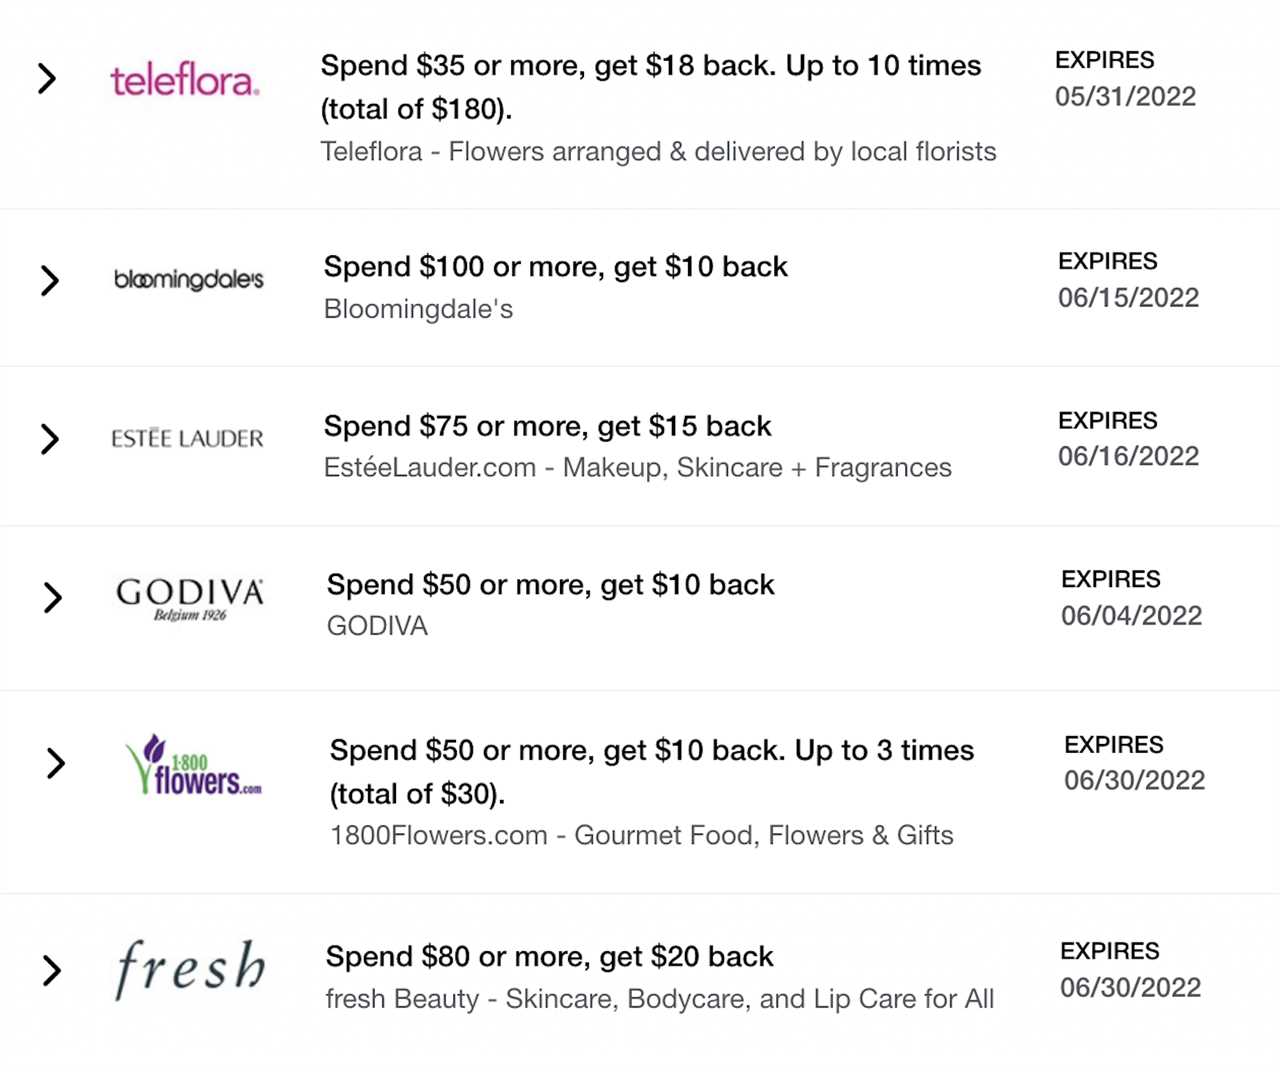 screenshot shows Amex Offers for shopping, flowers, chocolates and make up brands during Mother's Day 2022